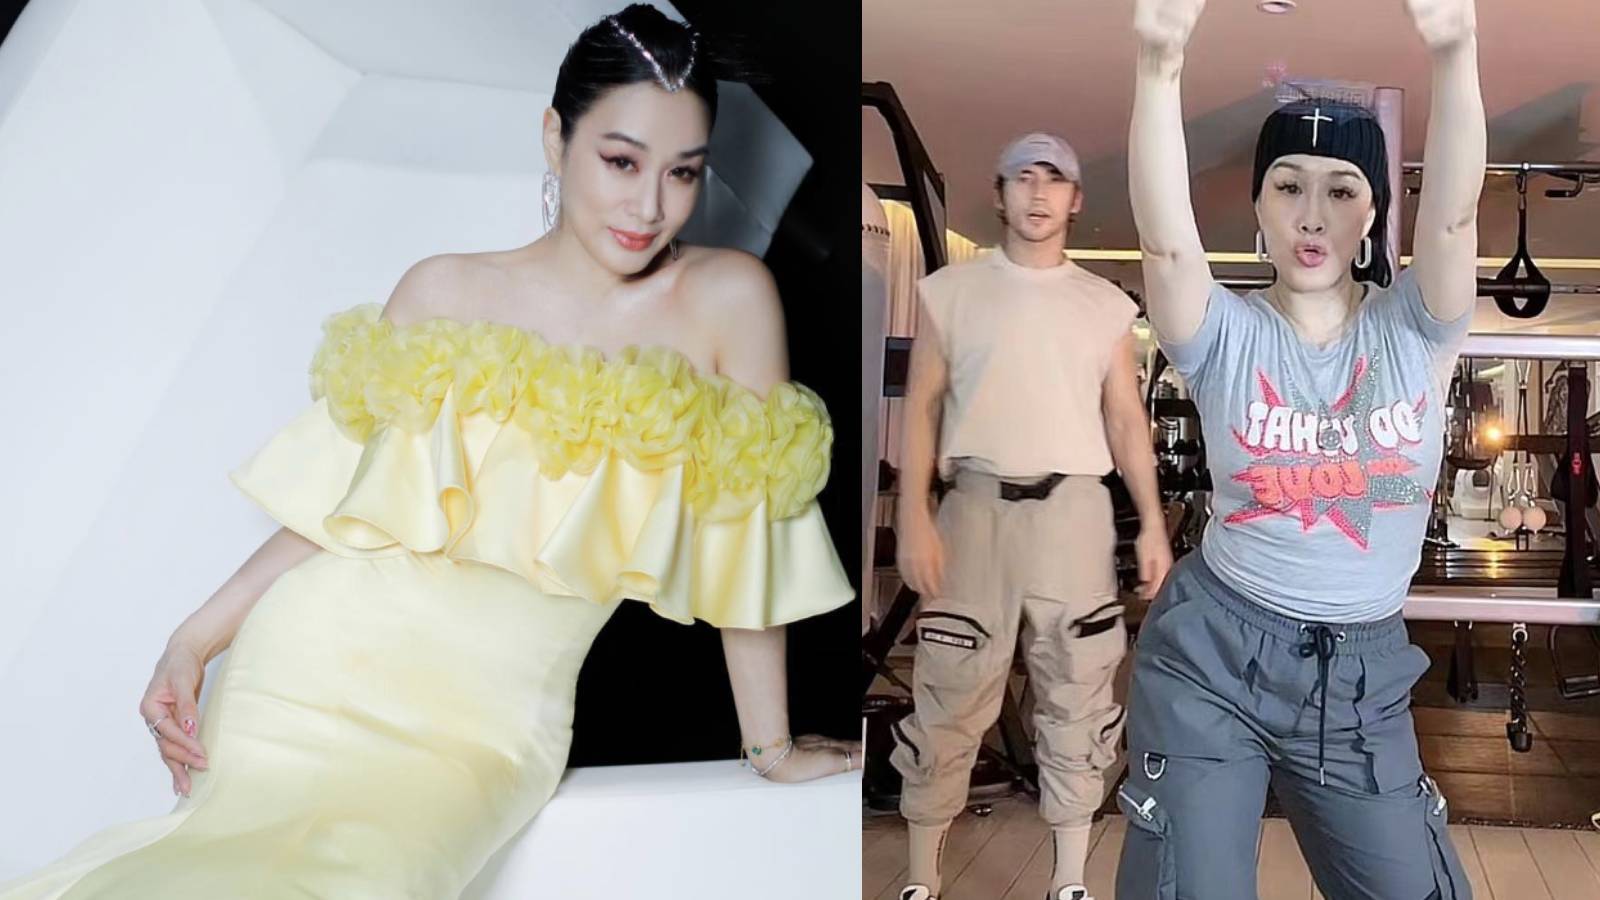 Christy Chung Live Streams Fitness Workout With Husband, Only To Get Fat Shamed By Netizens